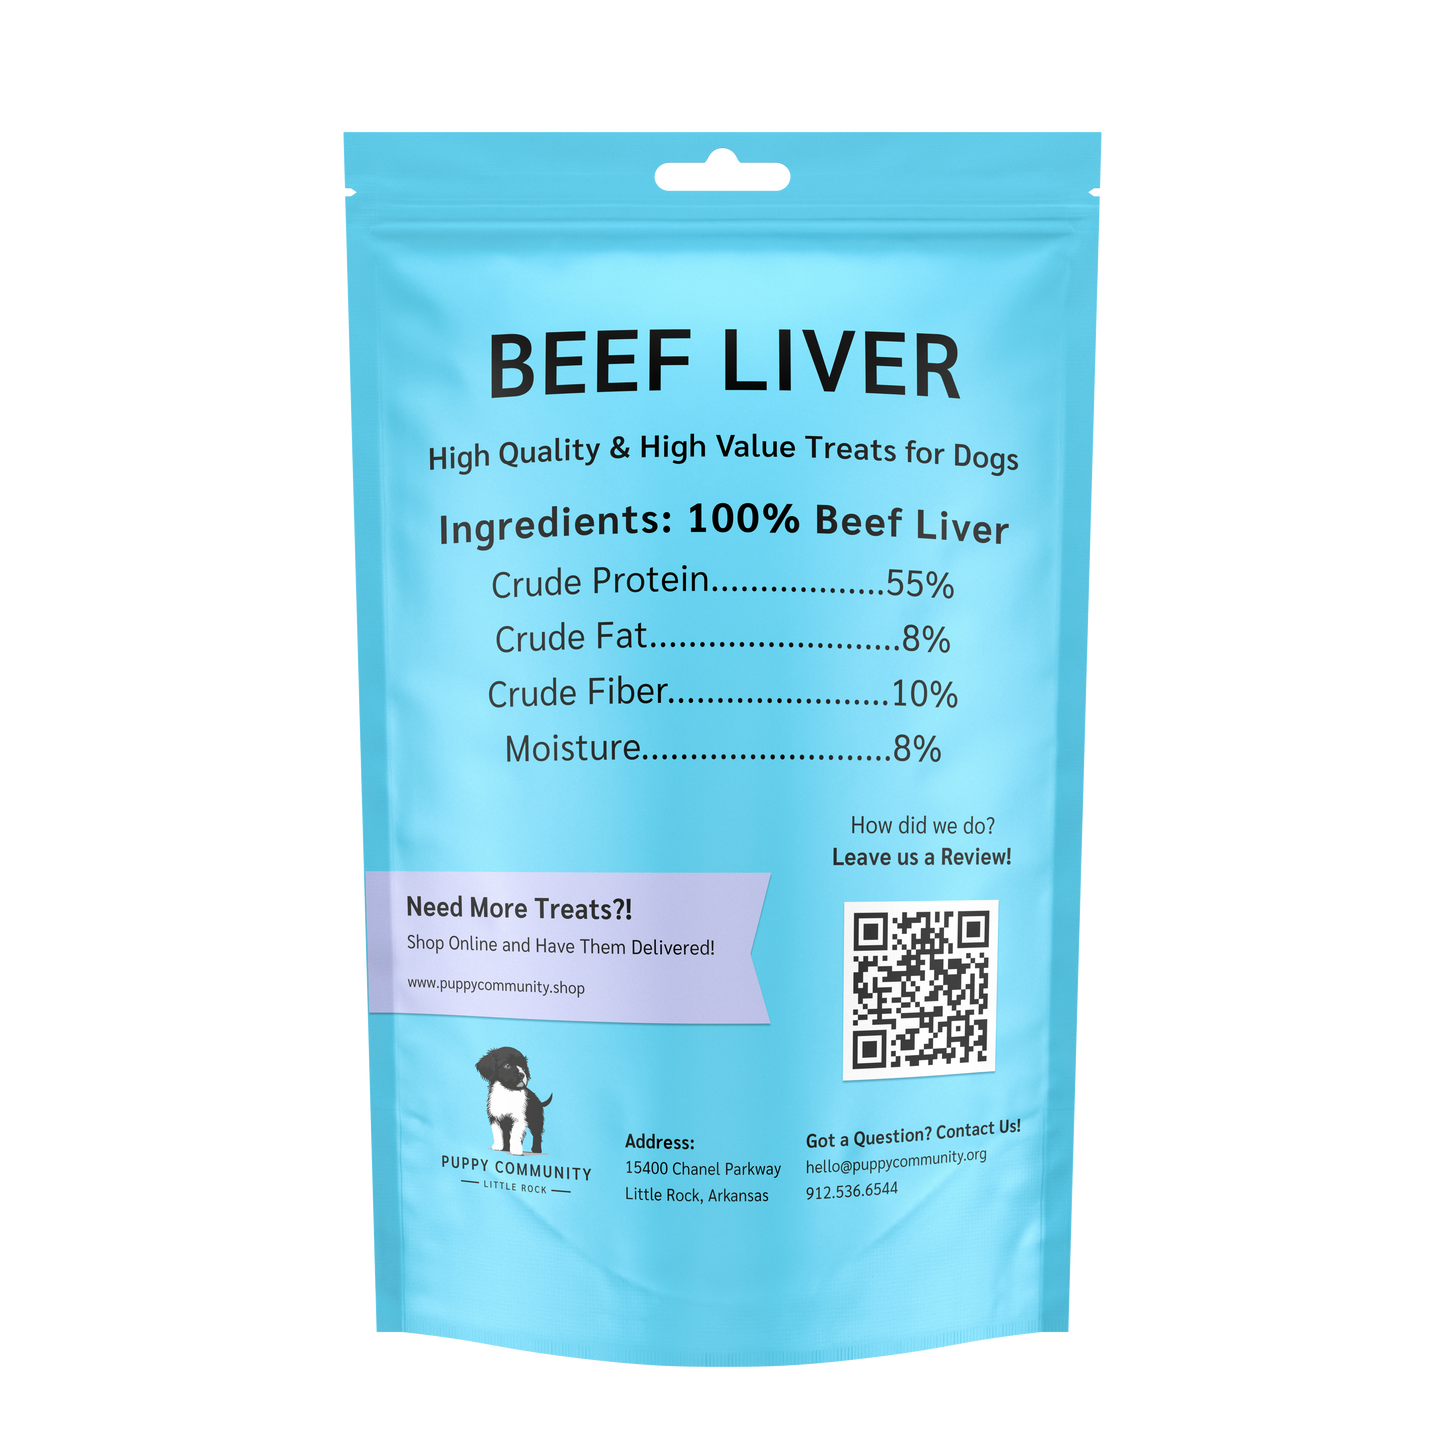 Freeze Dried Beef Liver